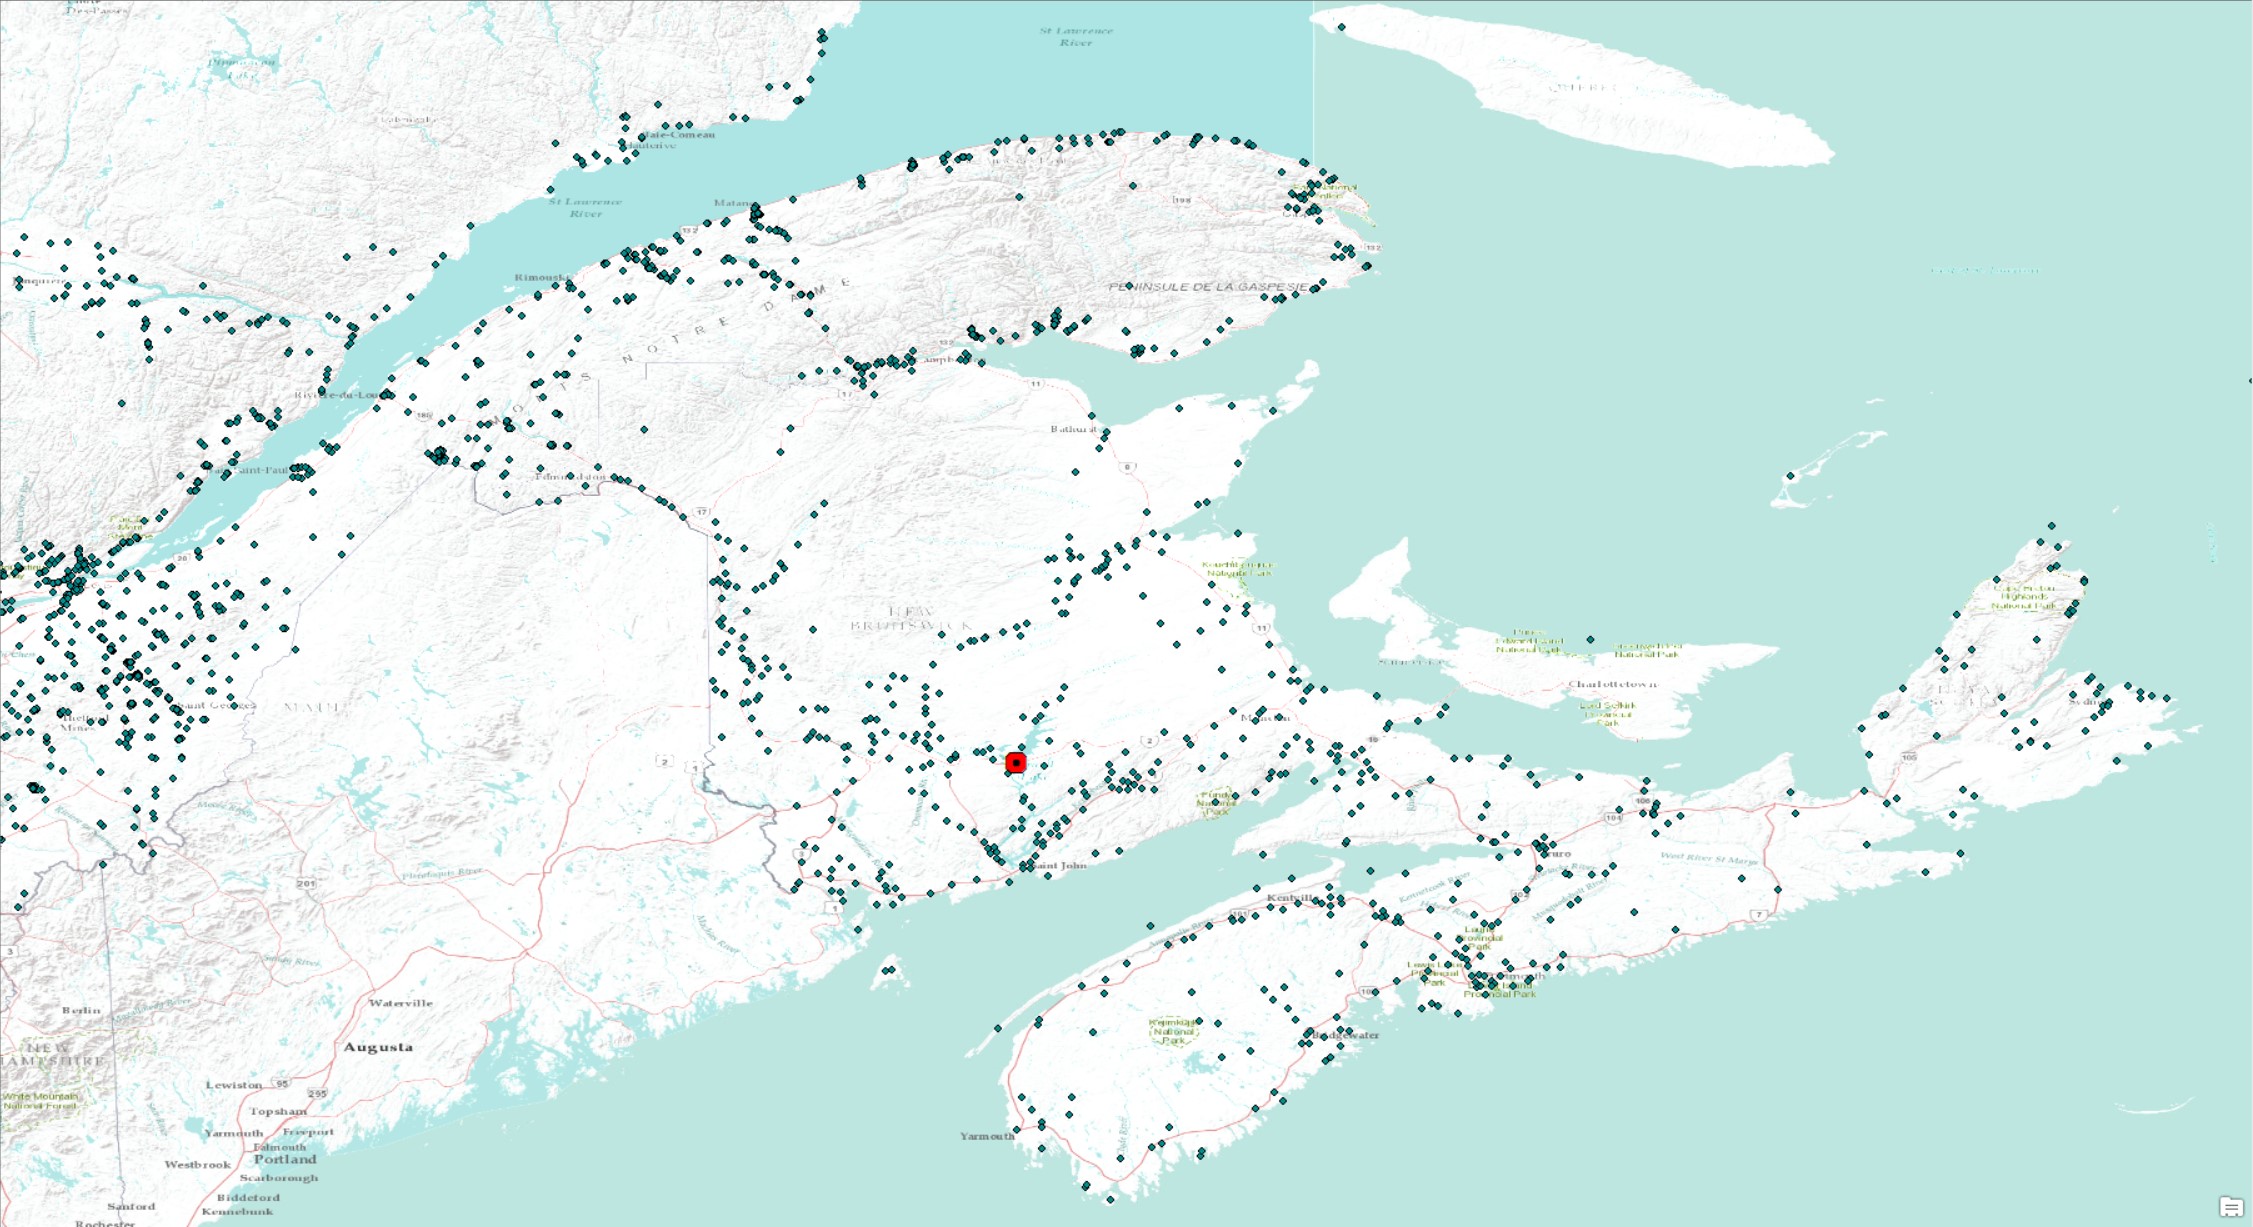 A screenshot of the historical flood events data layer for southern Atlantic Canada. Each blue point represents a documented flood event.